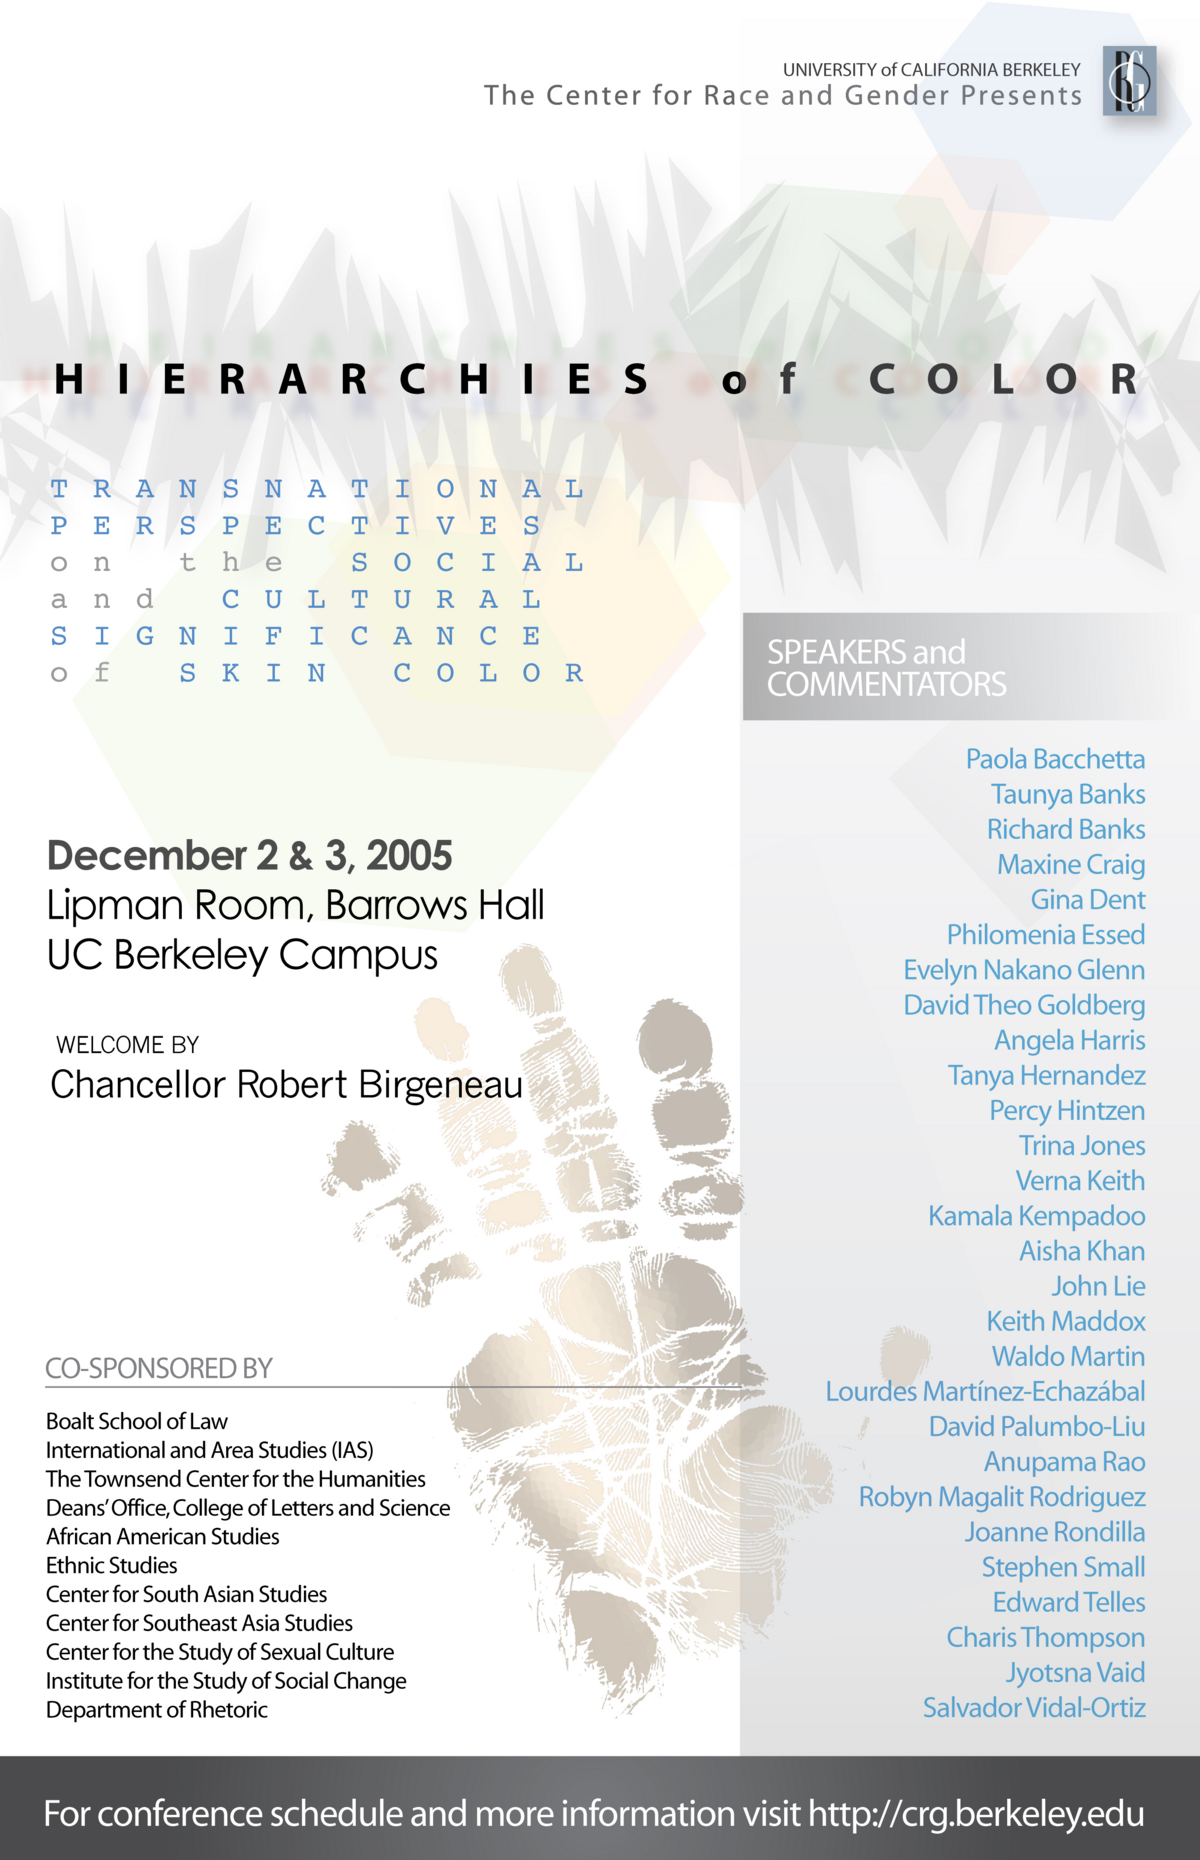 Event flyer for December 2005 Hierarchies of Color Symposium